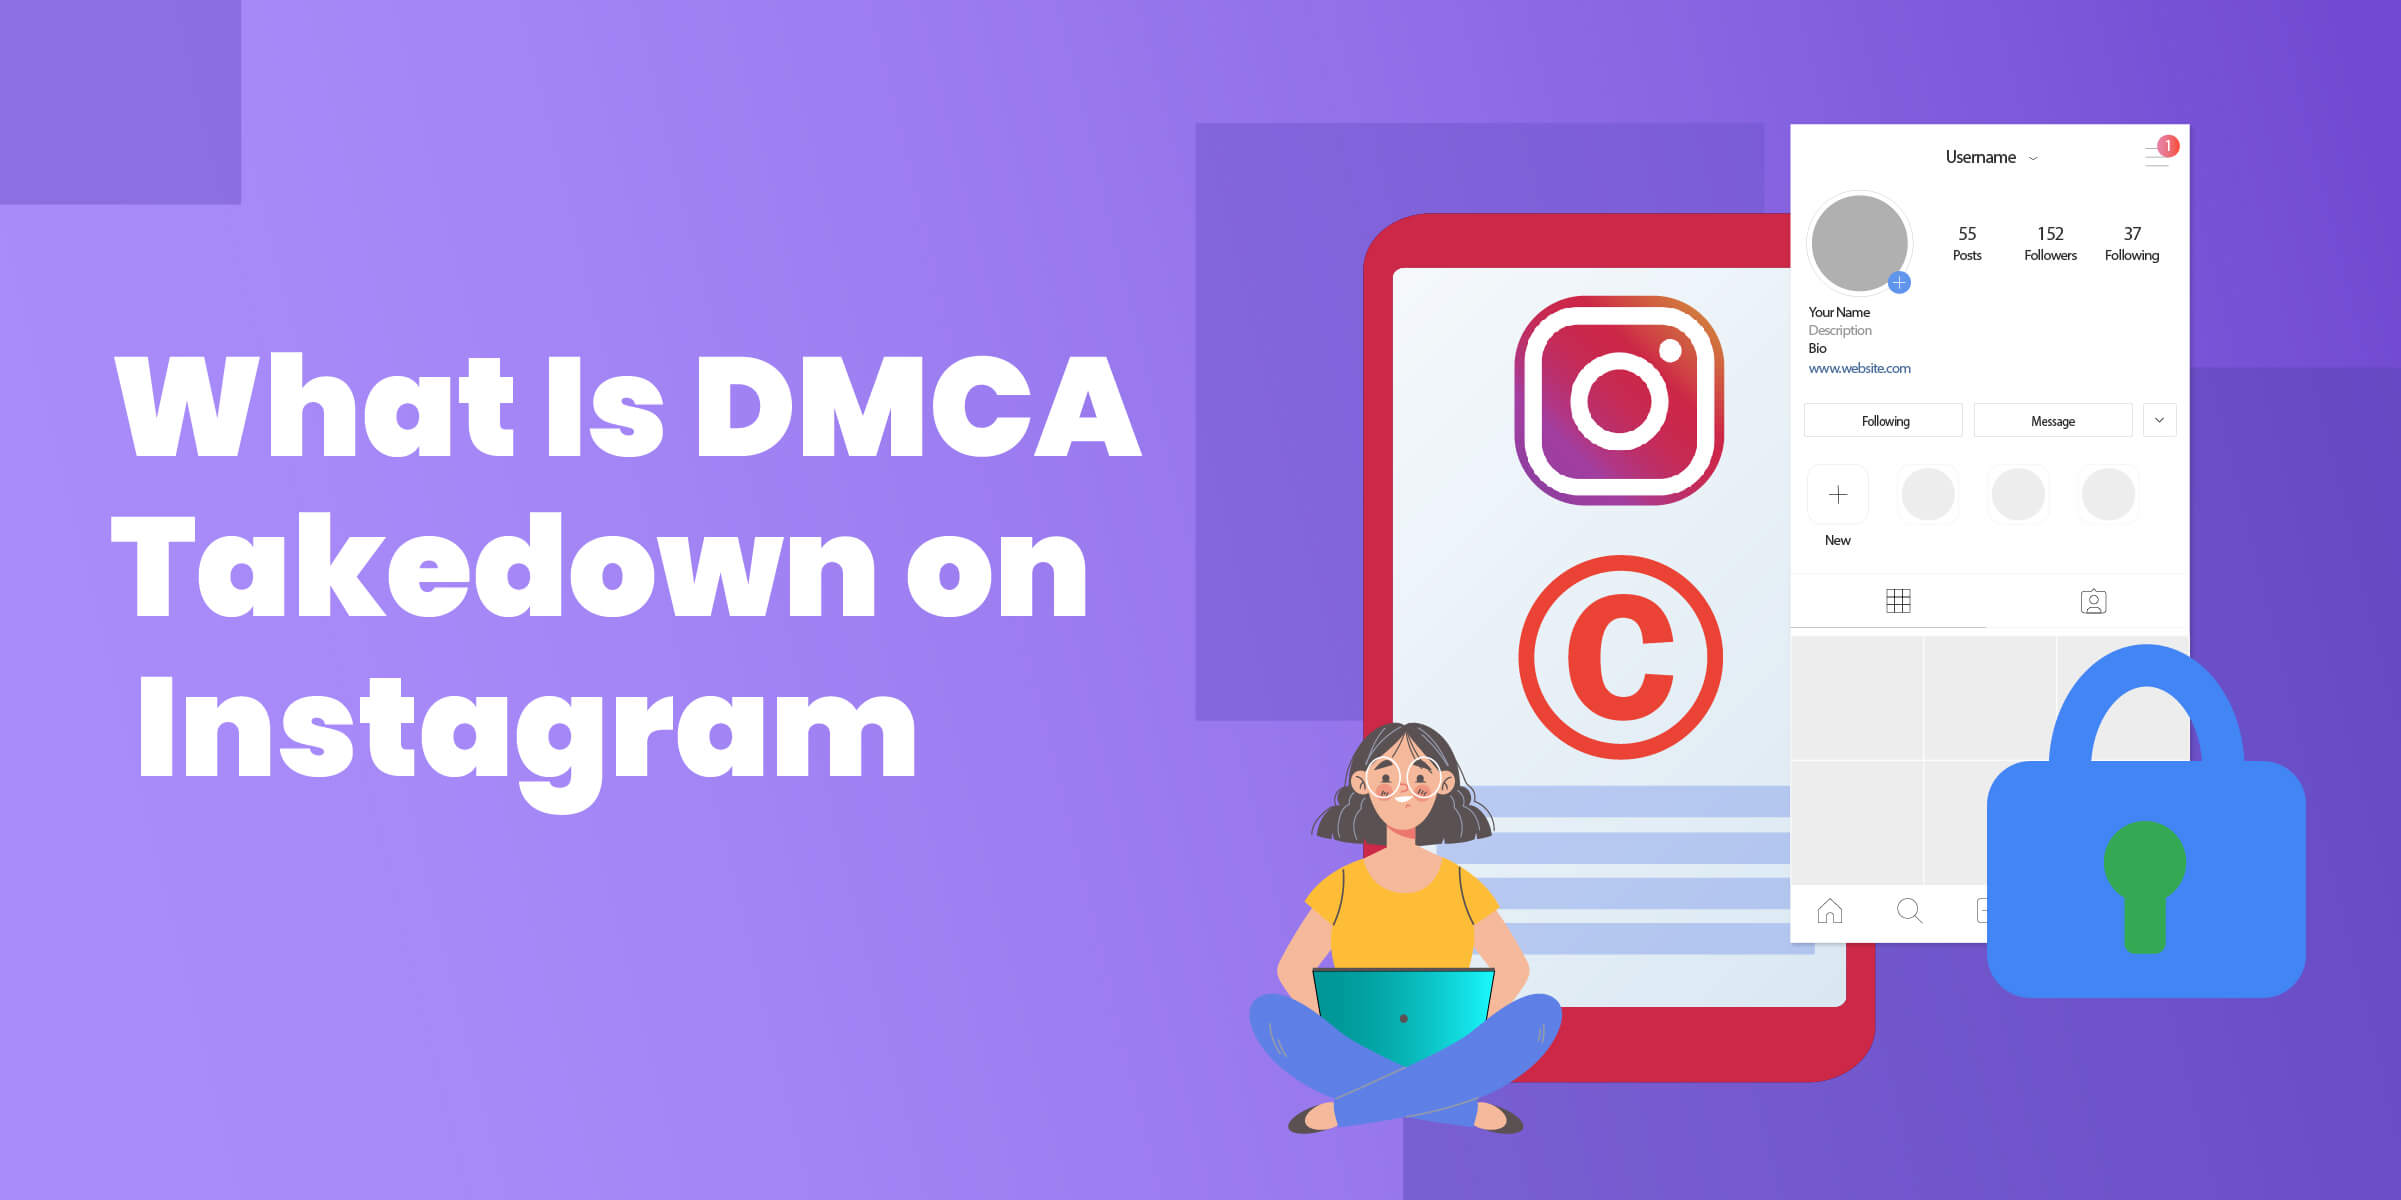 What Is DMCA Takedown on Instagram